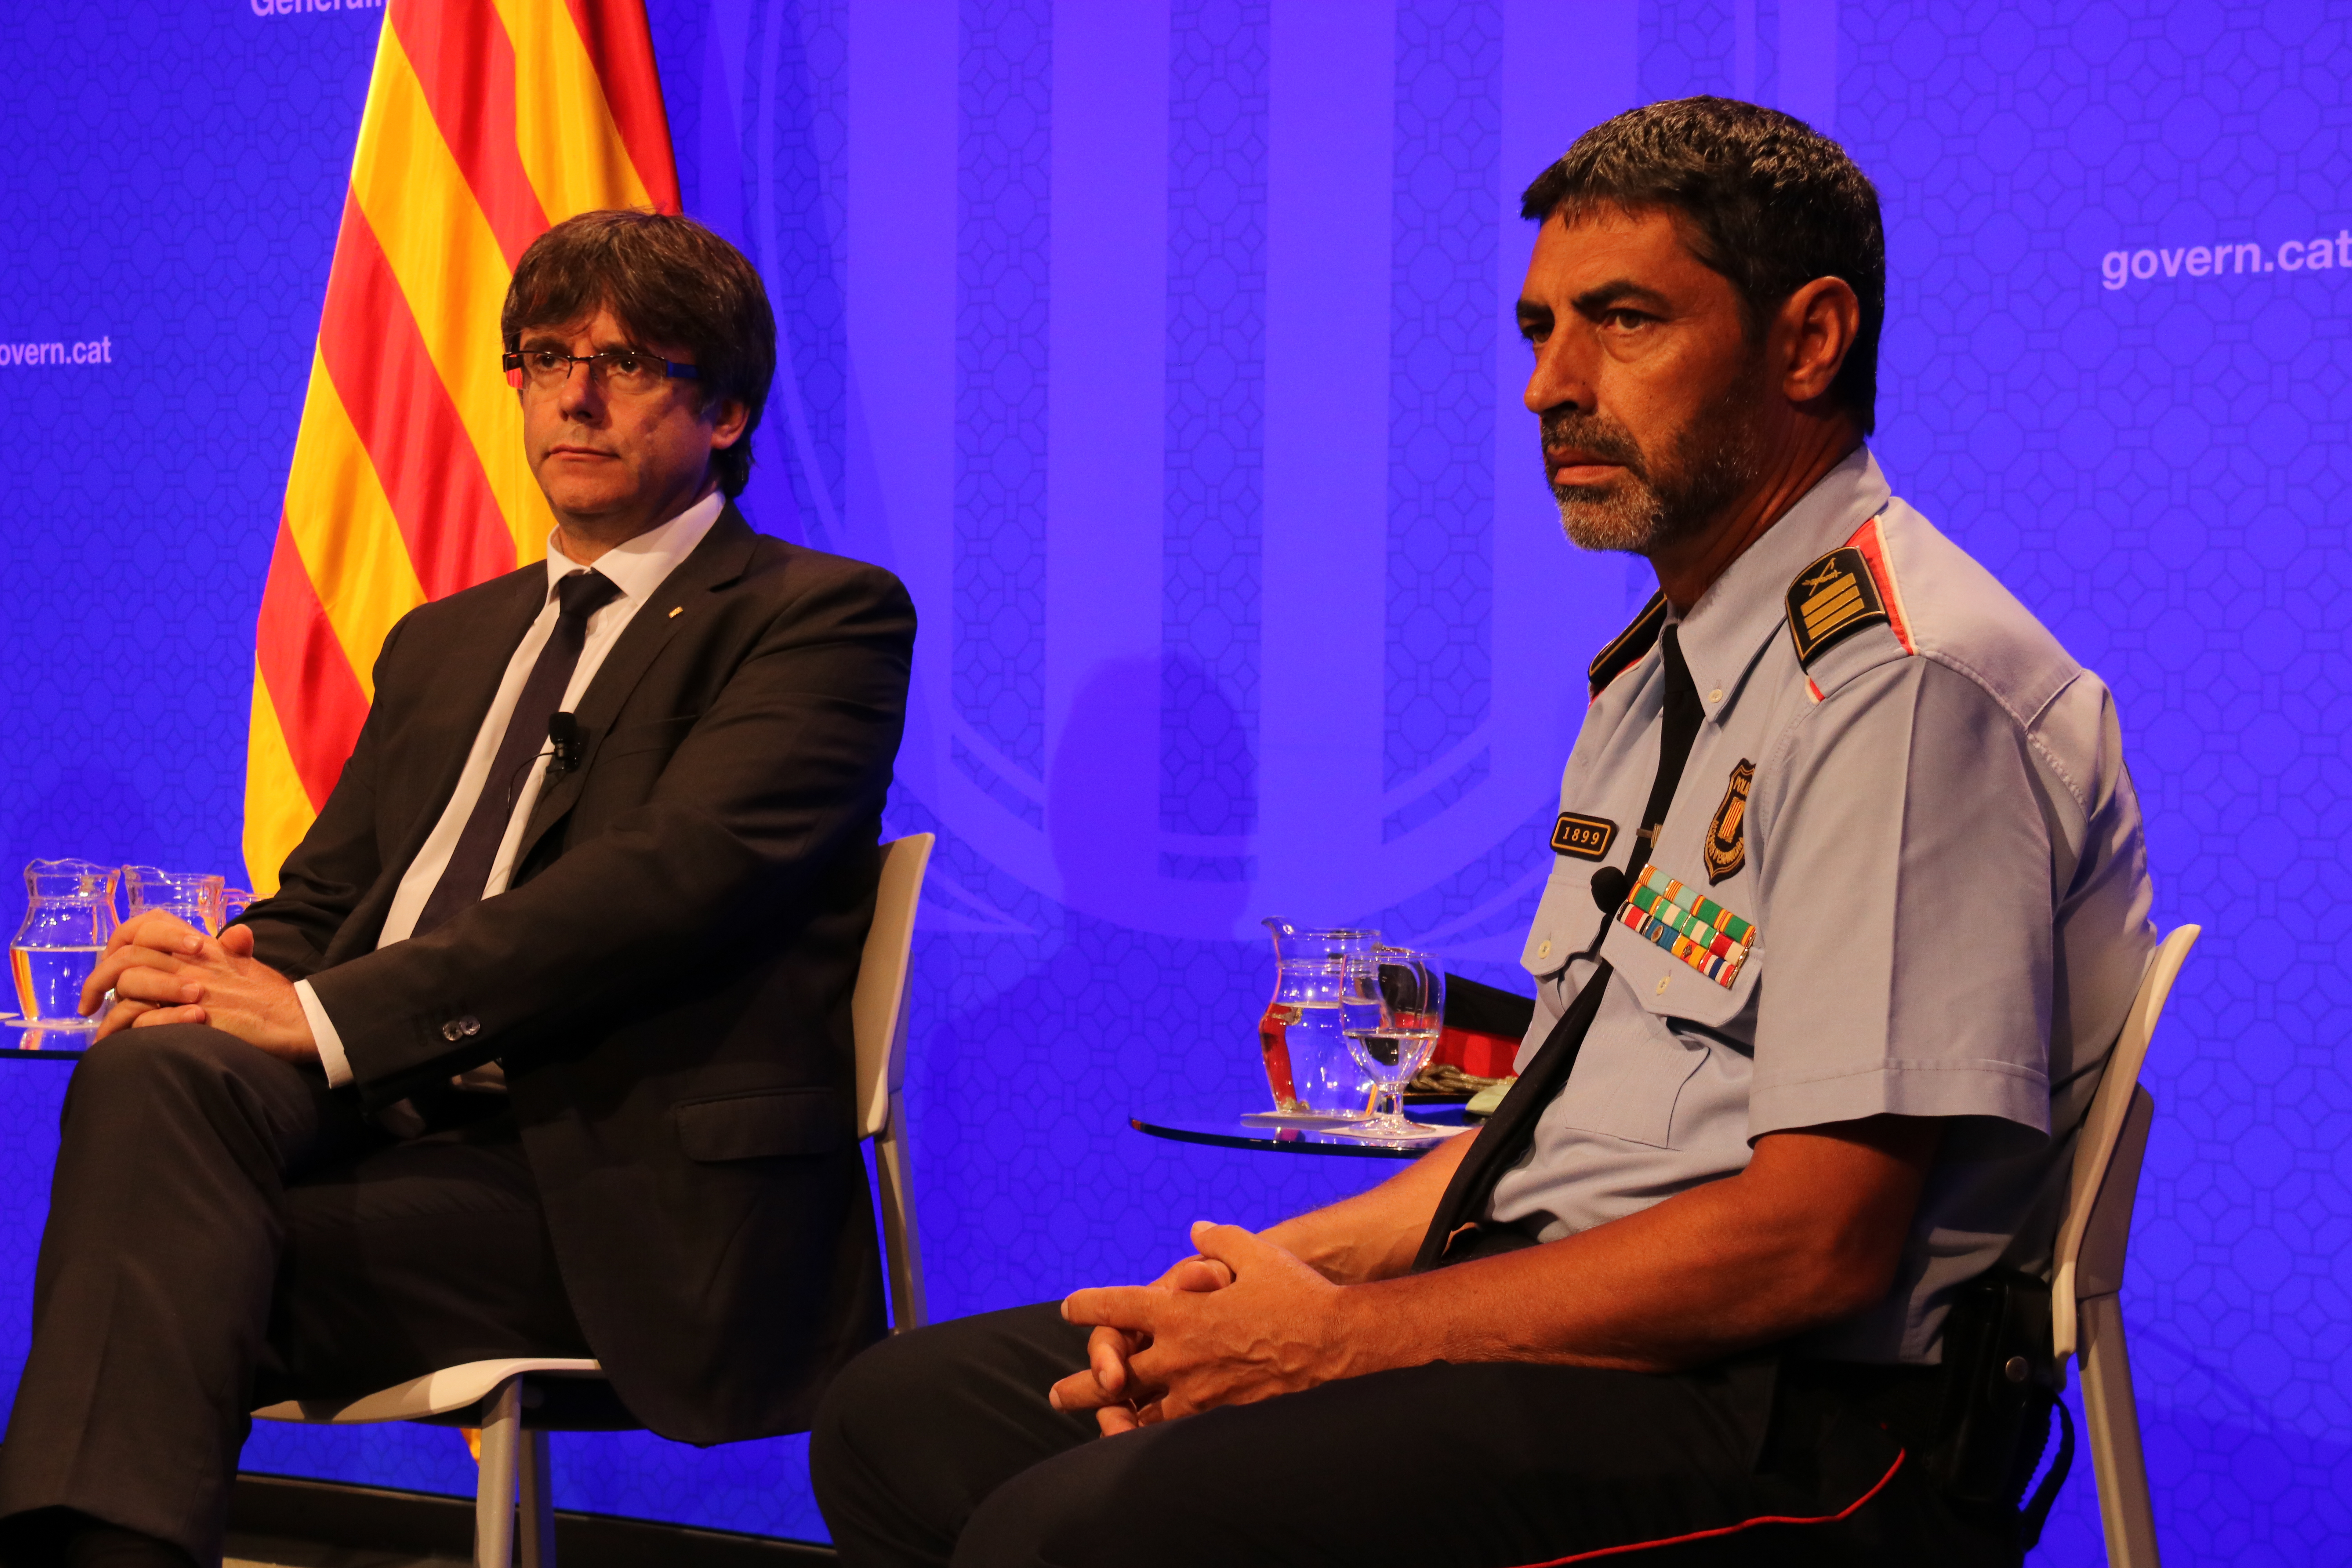 The Catalan president, Carles Puigdemont, and the Catalan police chief officer, Josep Lluís Trapero (by Guifré Jordan)